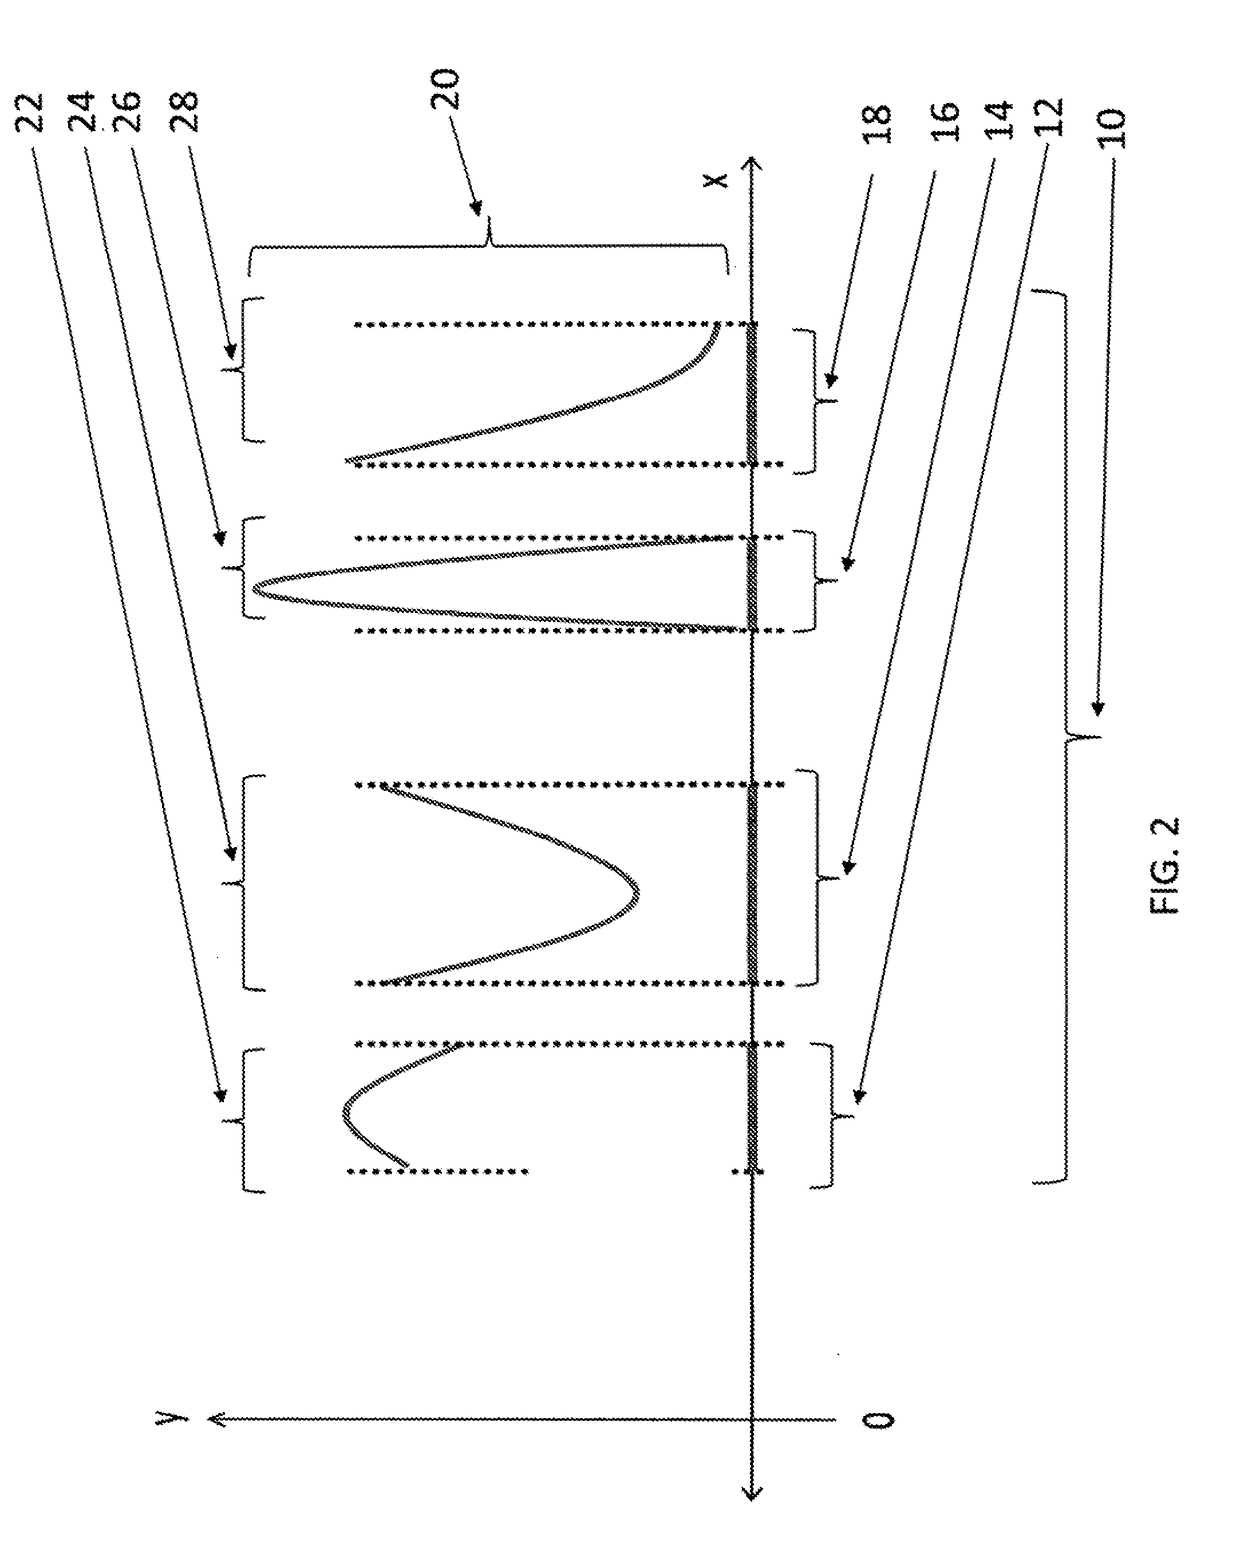 Design method for choosing spectral selectivity in multispectral and hyperspectral systems